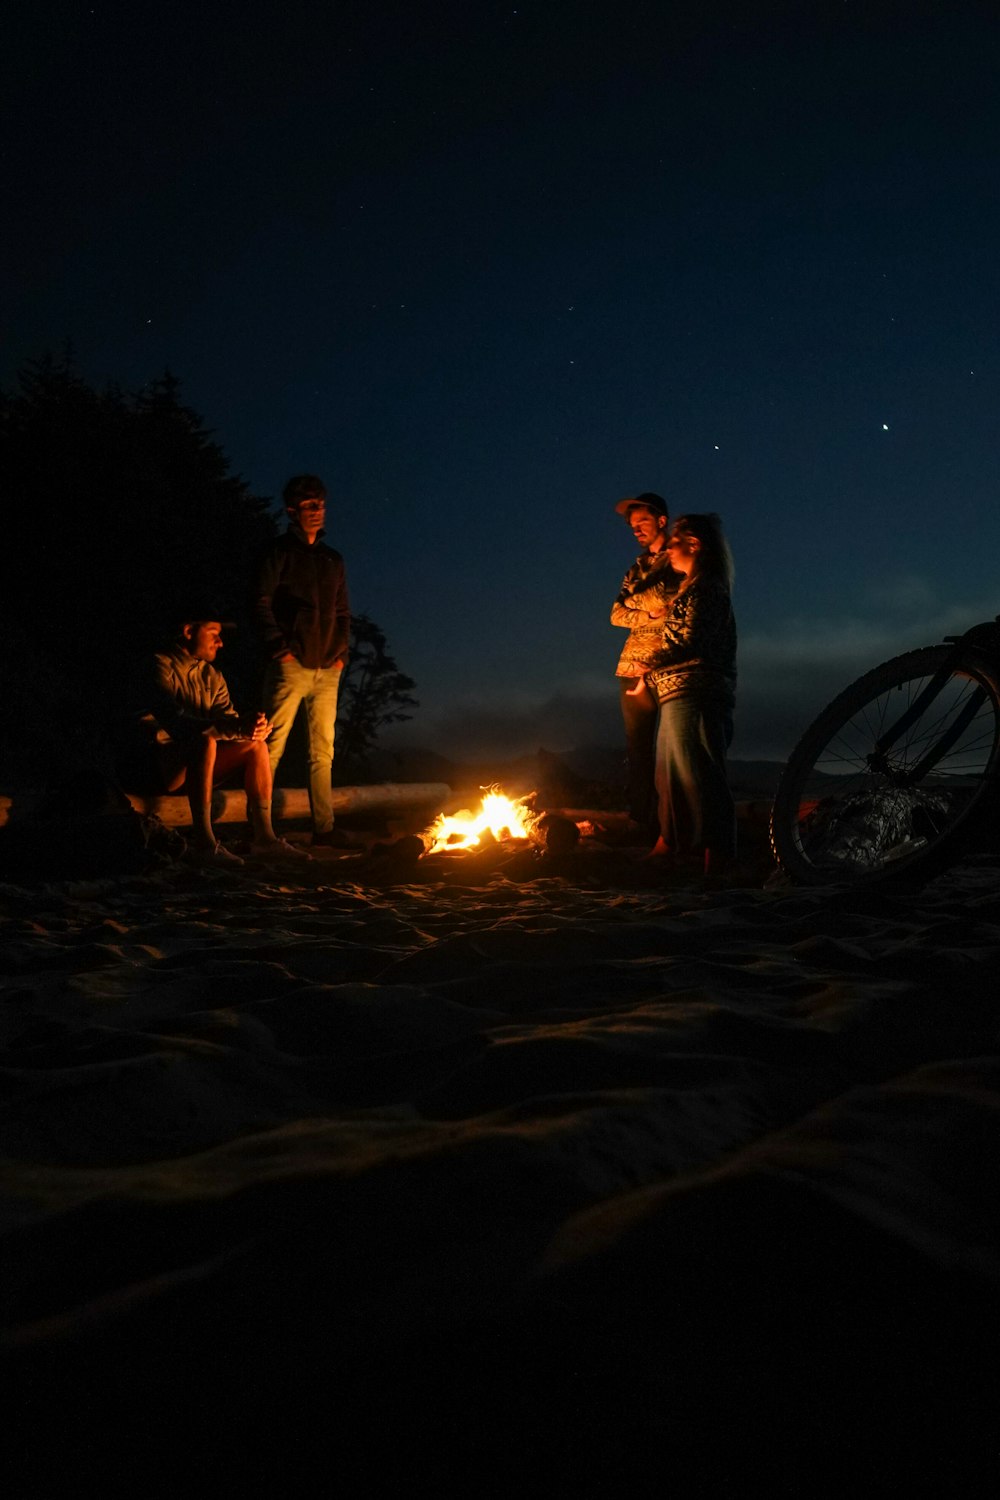 man and woman standing near bonfire during night time